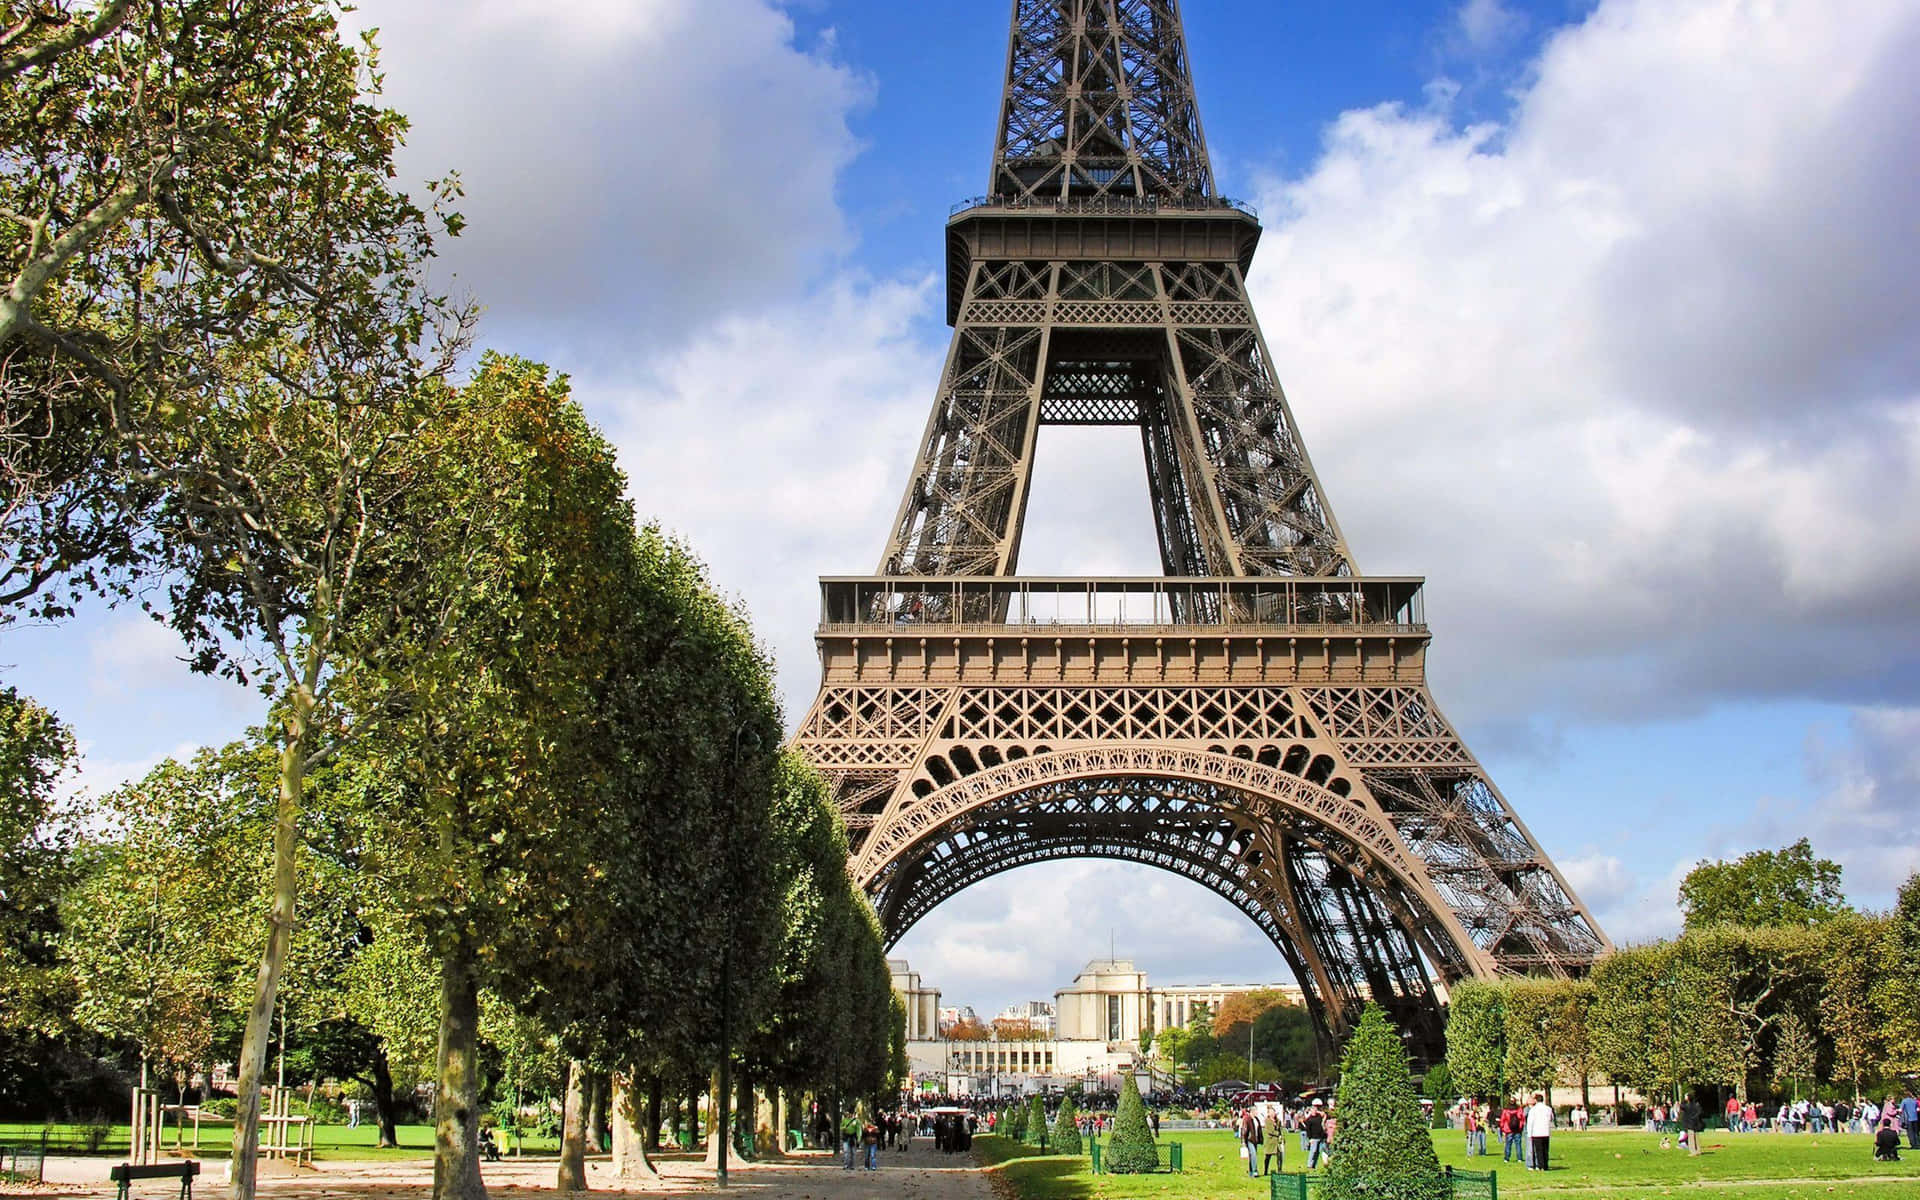 "The majestic Eiffel Tower in Paris, France."